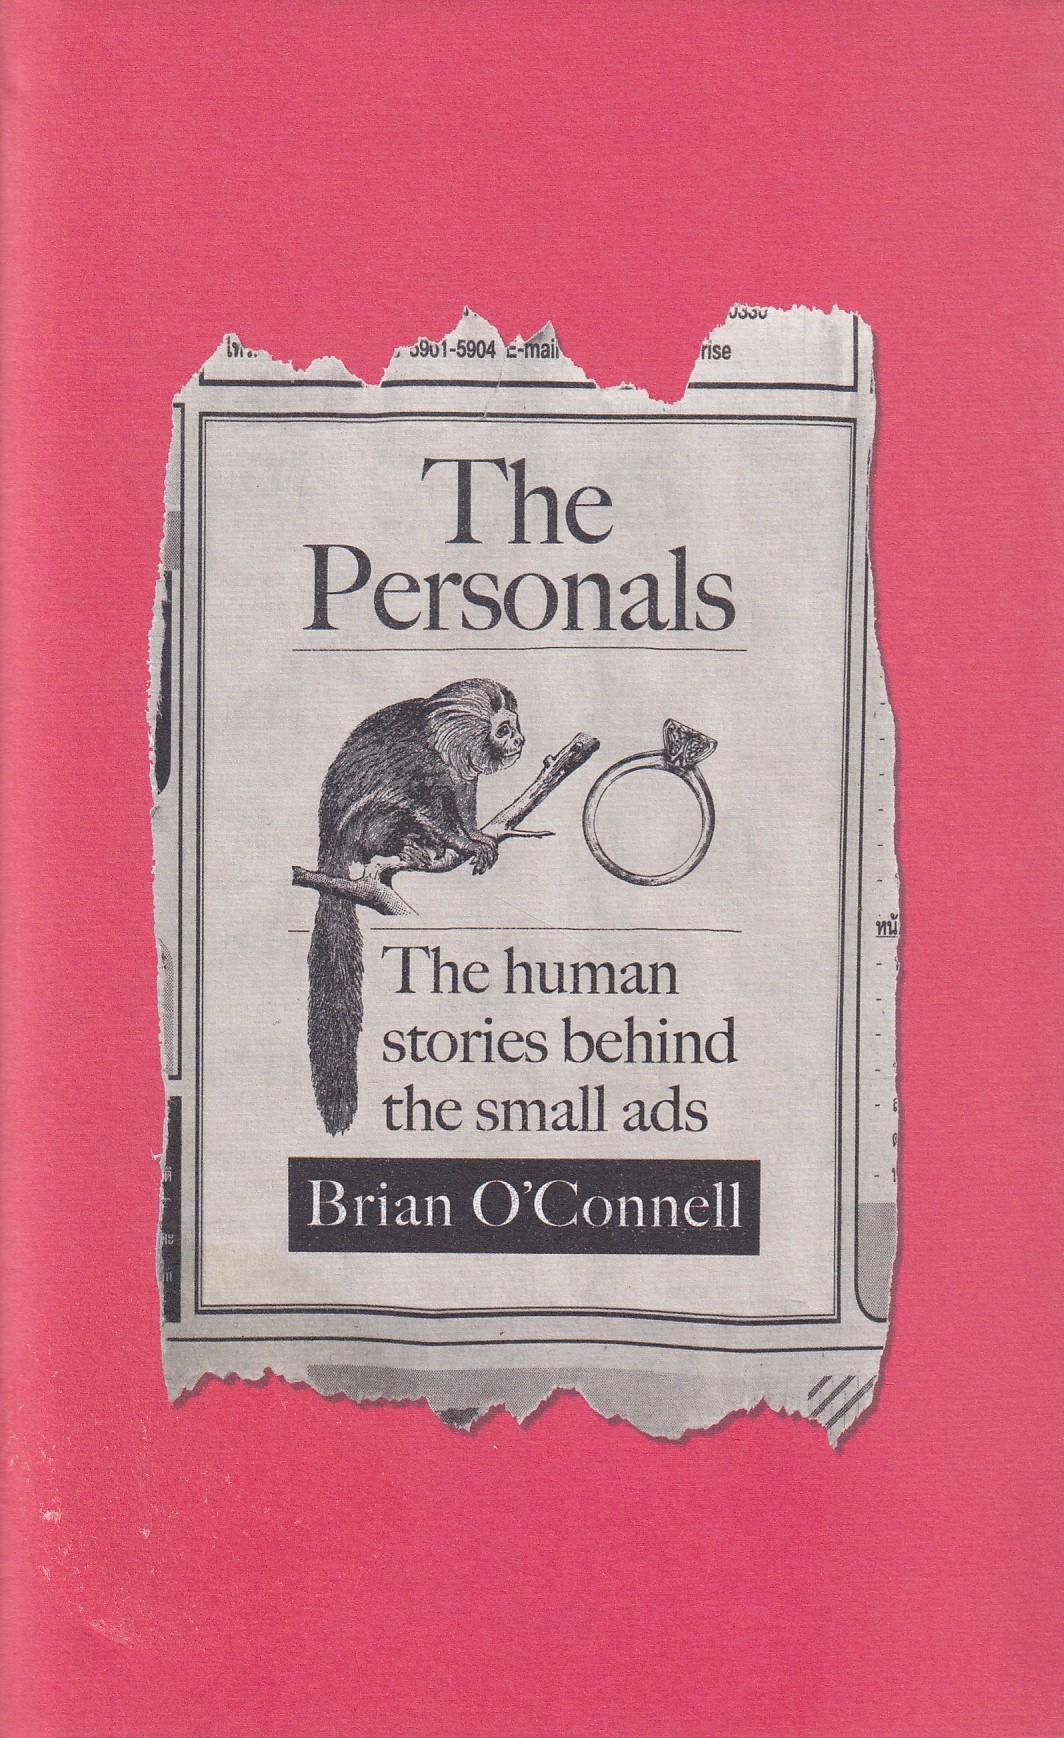 The Personals: The human stories behind the small ads [Signed] | Brian O'Connell | Charlie Byrne's